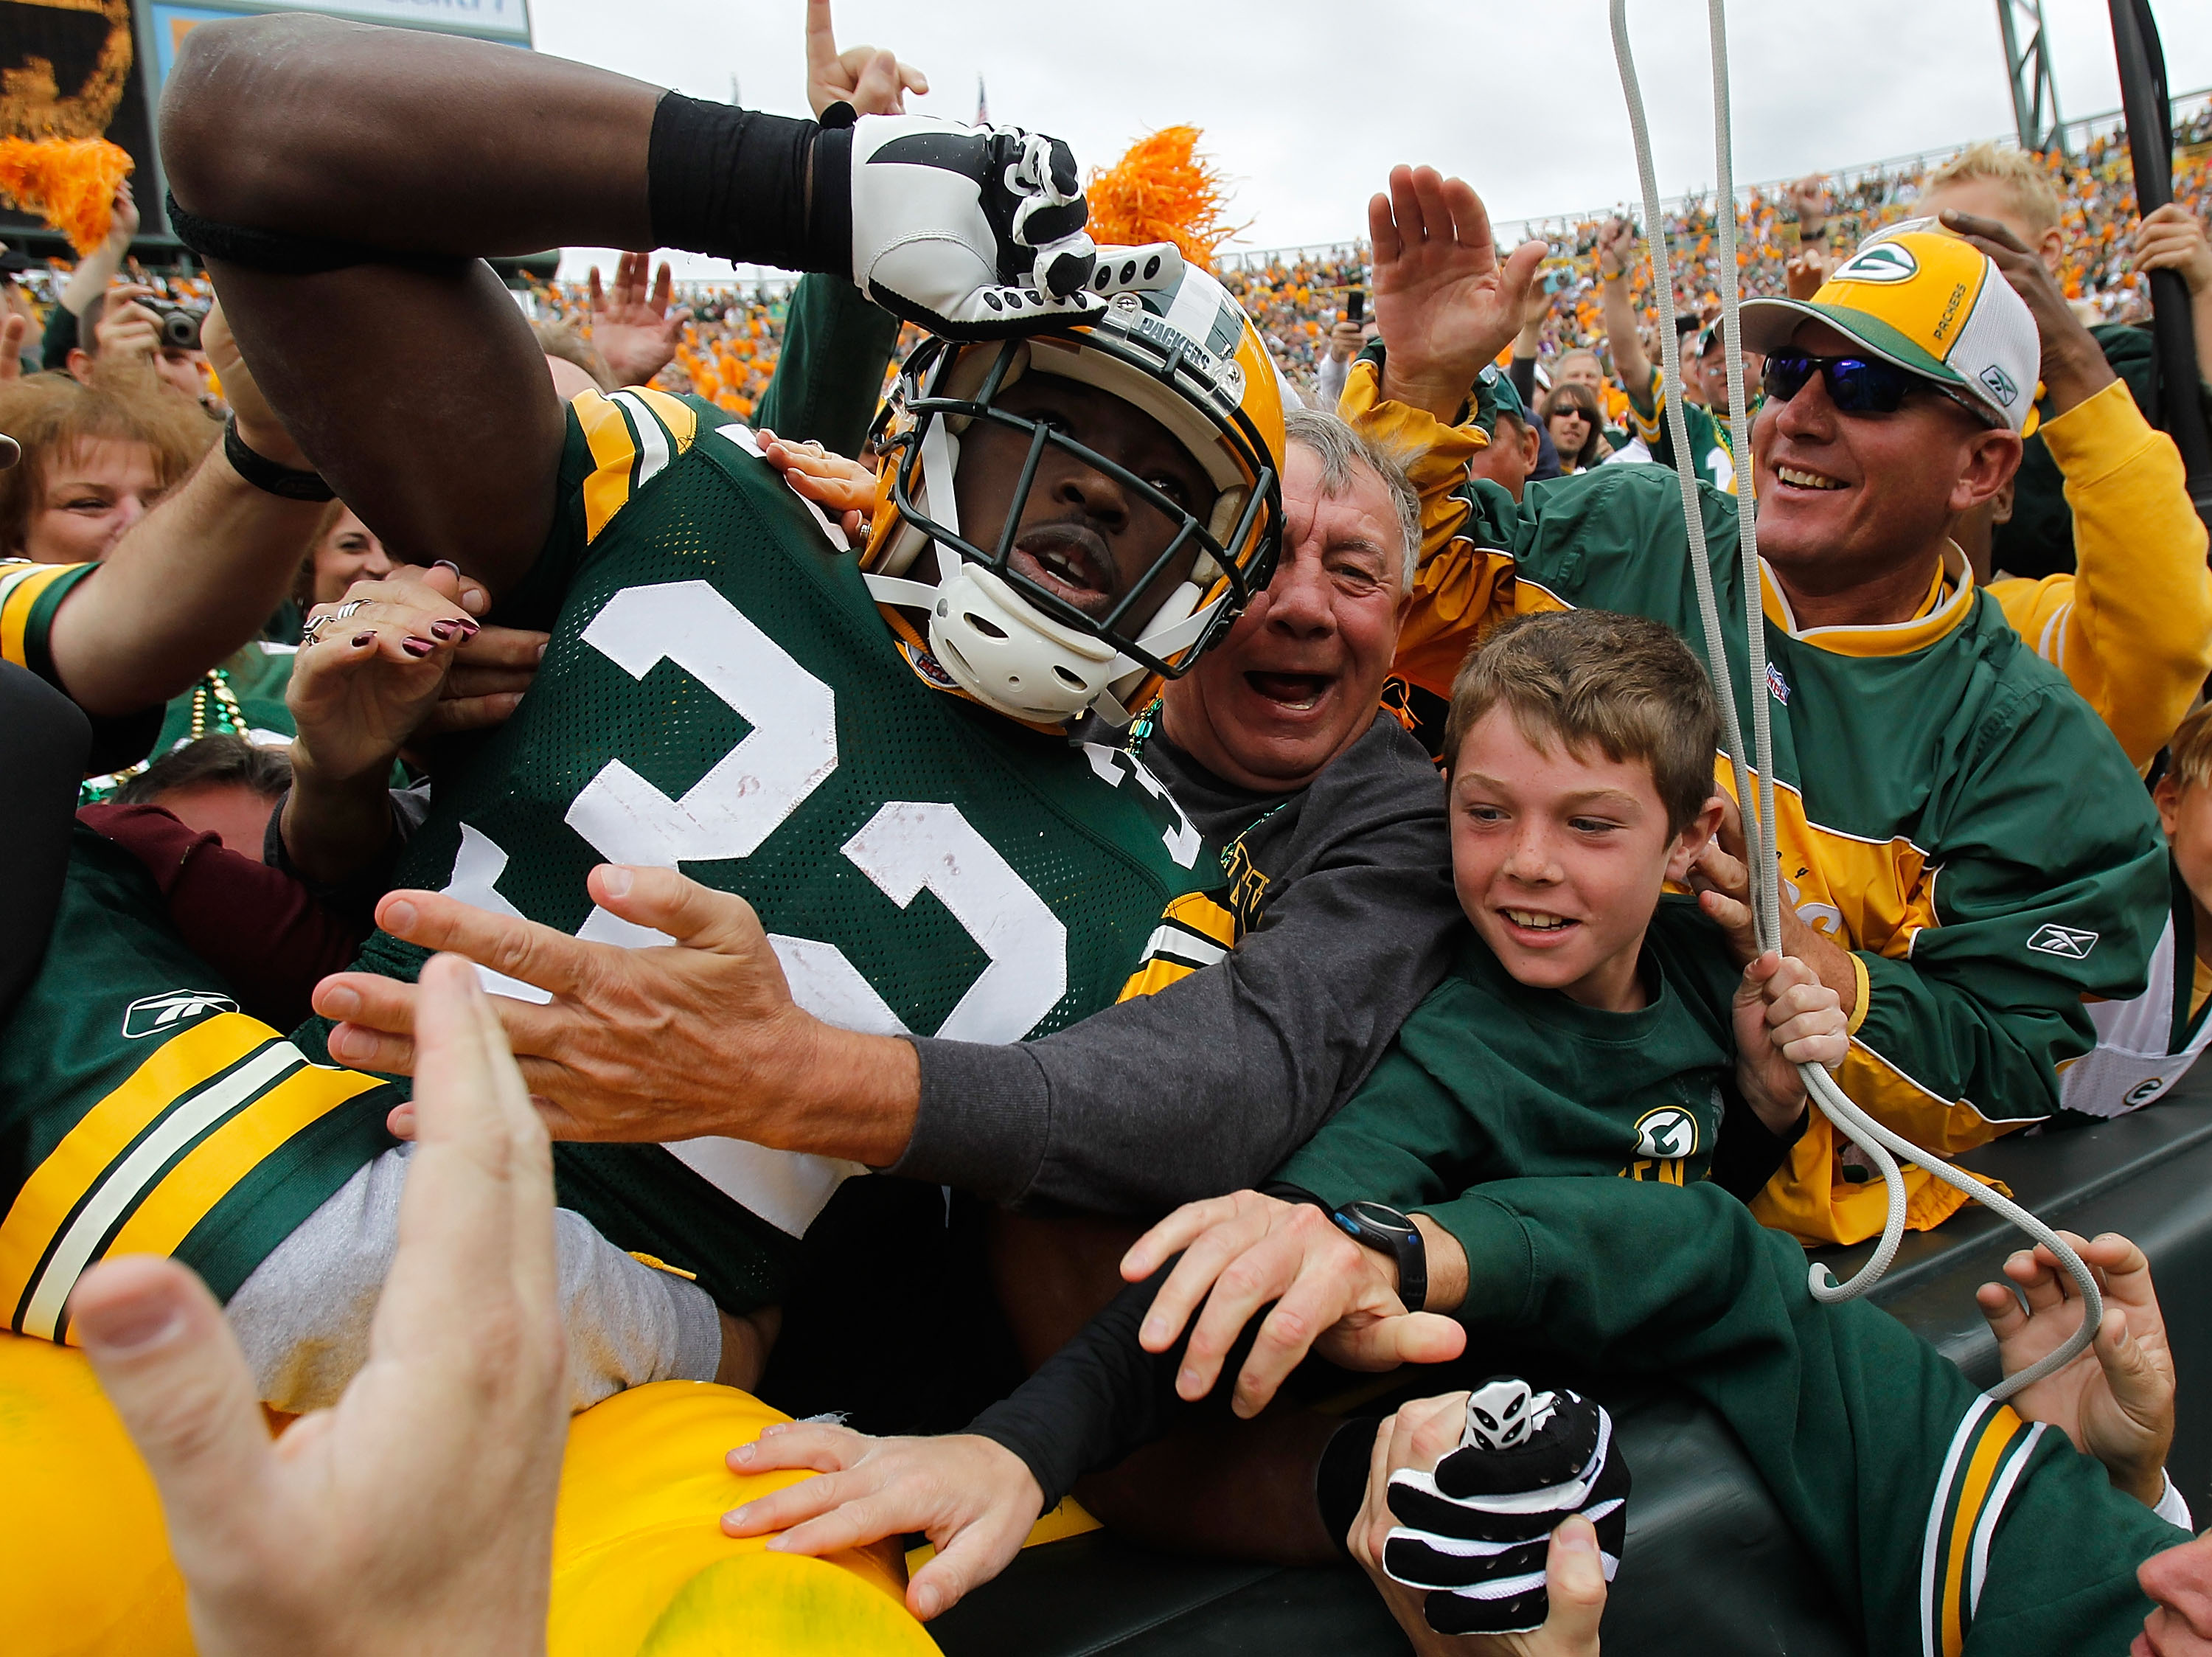 GREEN BAY, WI - SEPTEMBER 19: Brandon Jackson #32 of the Green Bay Packers celebrates a touchdown with a 'Lambeau Leap' into the stands against of the Buffalo Bills at Lambeau Field on September 19, 2010 in Green Bay, Wisconsin. The Packers defeated the B